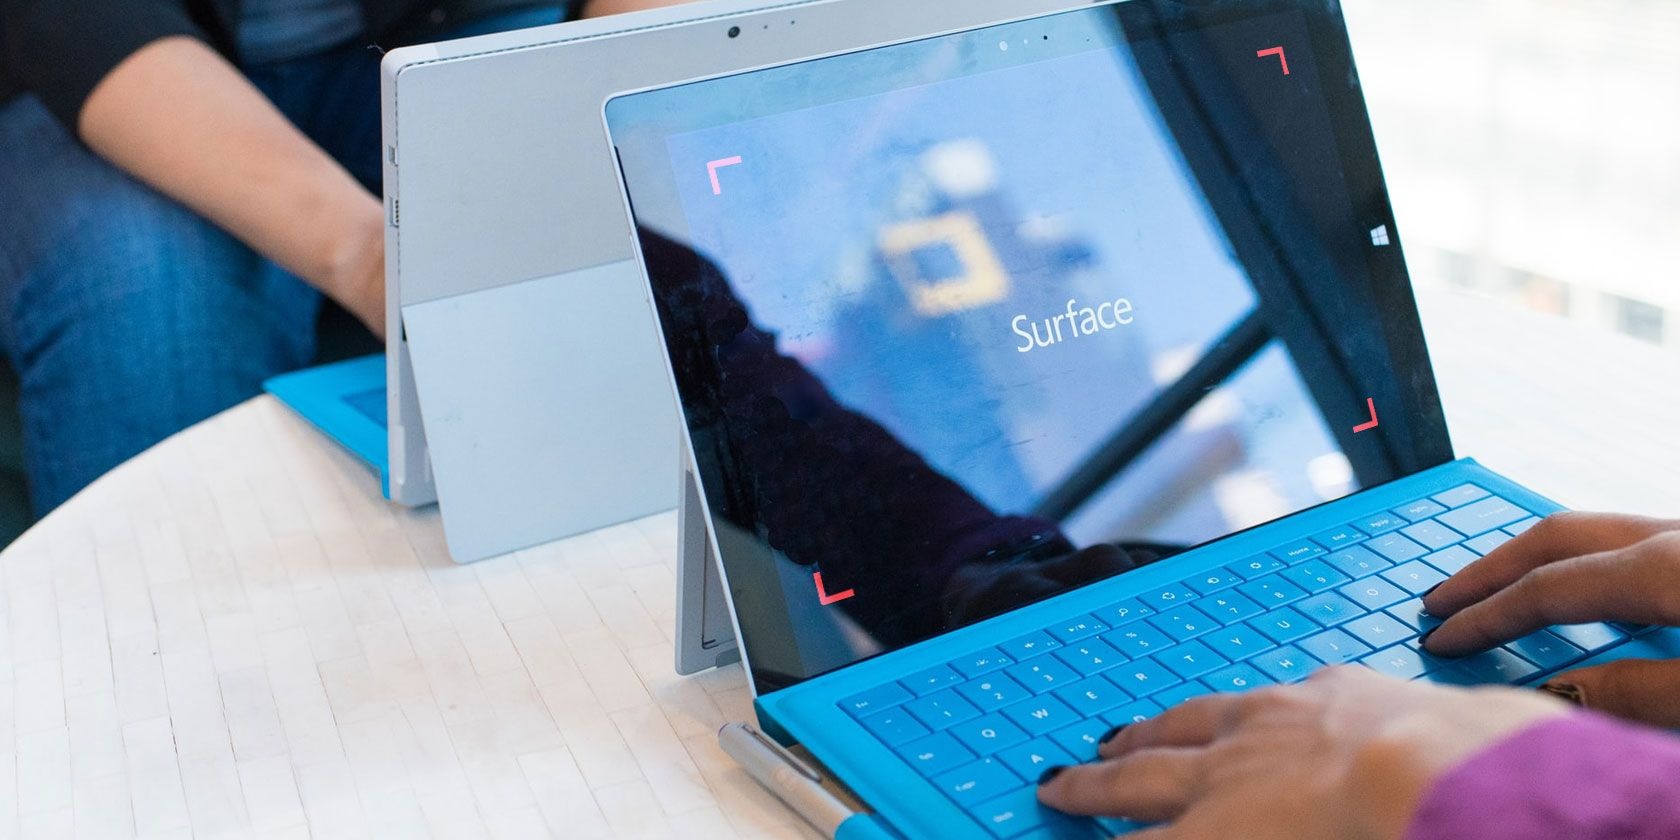 How To Take A Screenshot On A Surface Pro